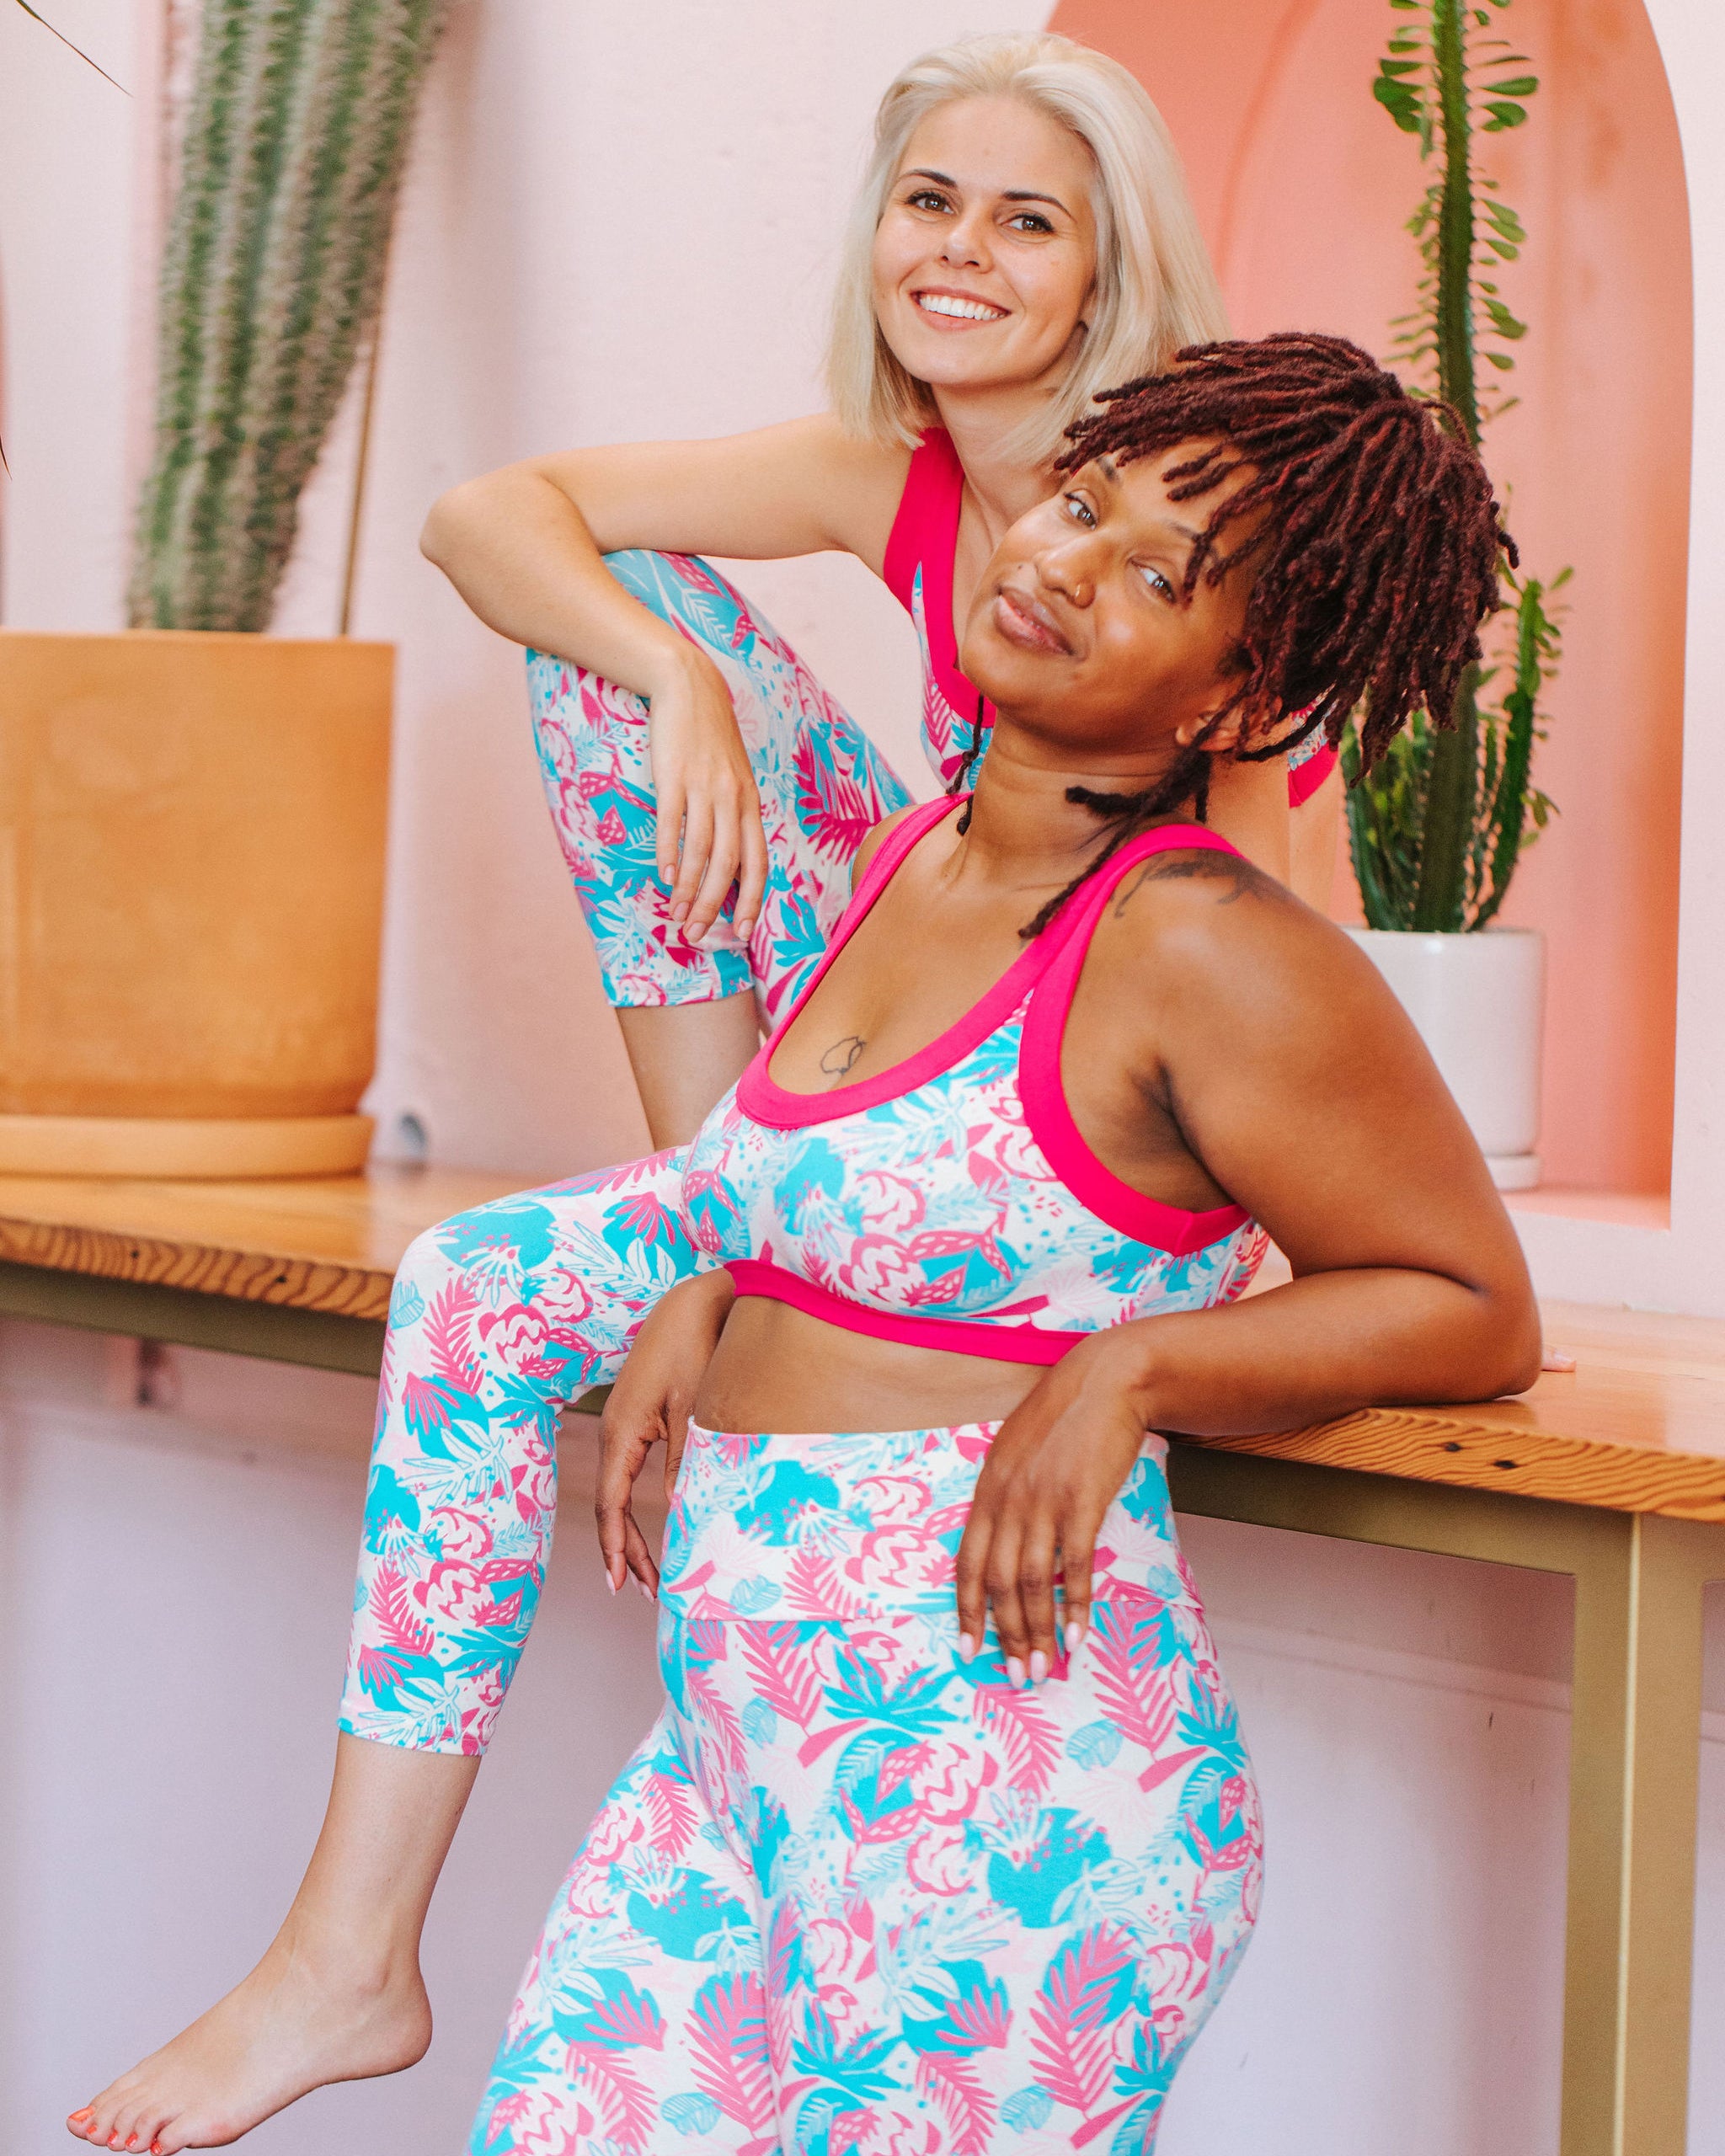 Two models wearing sets of Thunderpants Bralettes and 3/4 Length Leggings in Finding Flamingos - pink and blue Miami-inspired print.